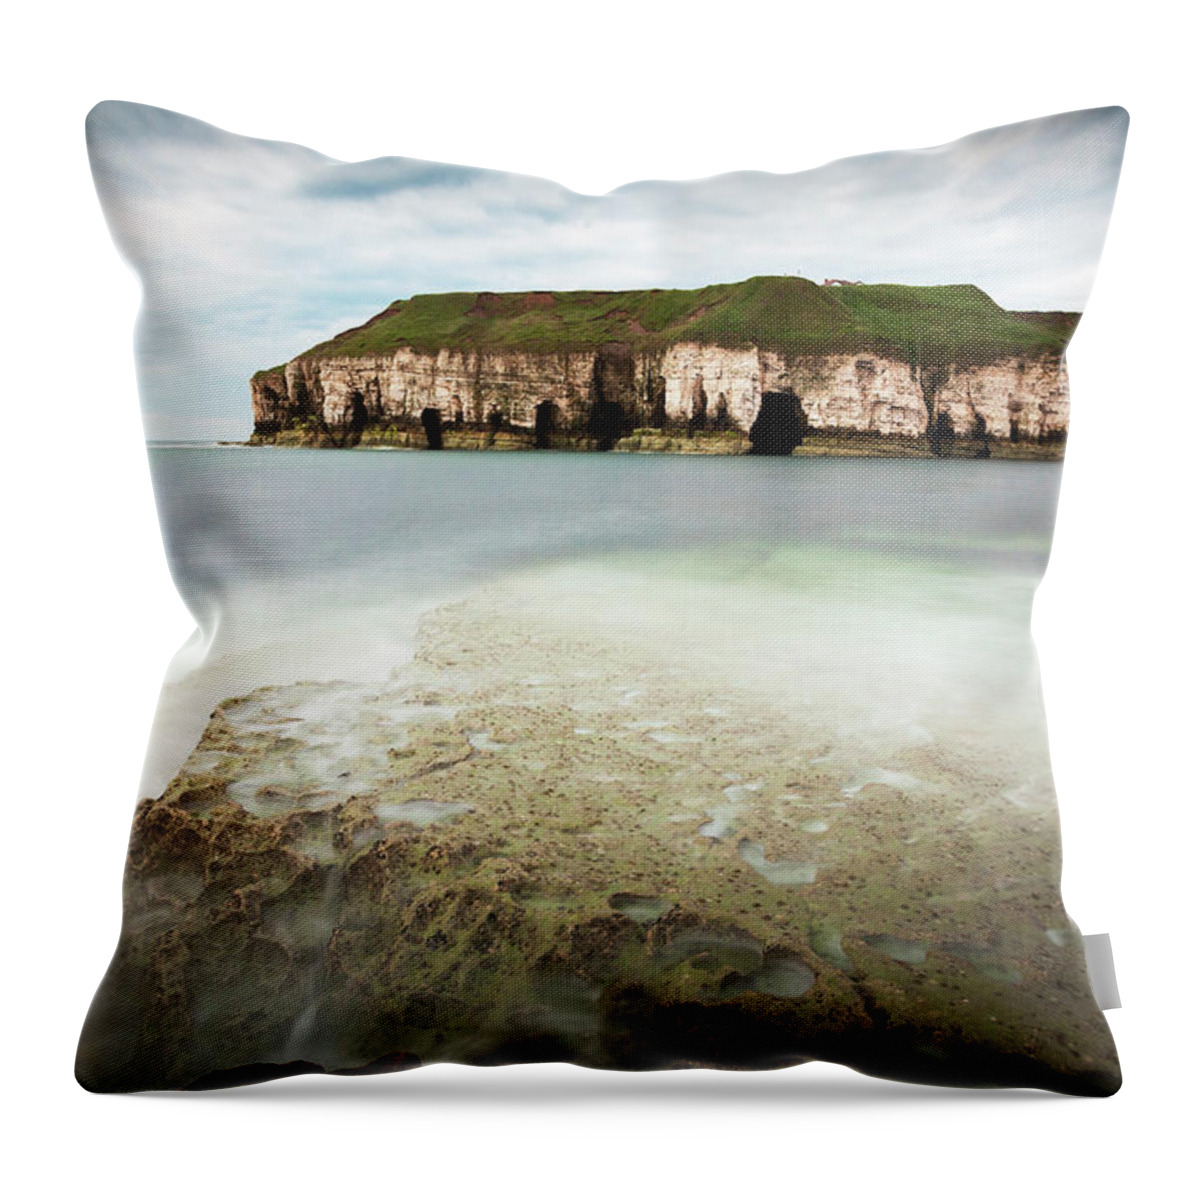 Scenics Throw Pillow featuring the photograph Thornwick Bay, Flamborough Head, East by Empato